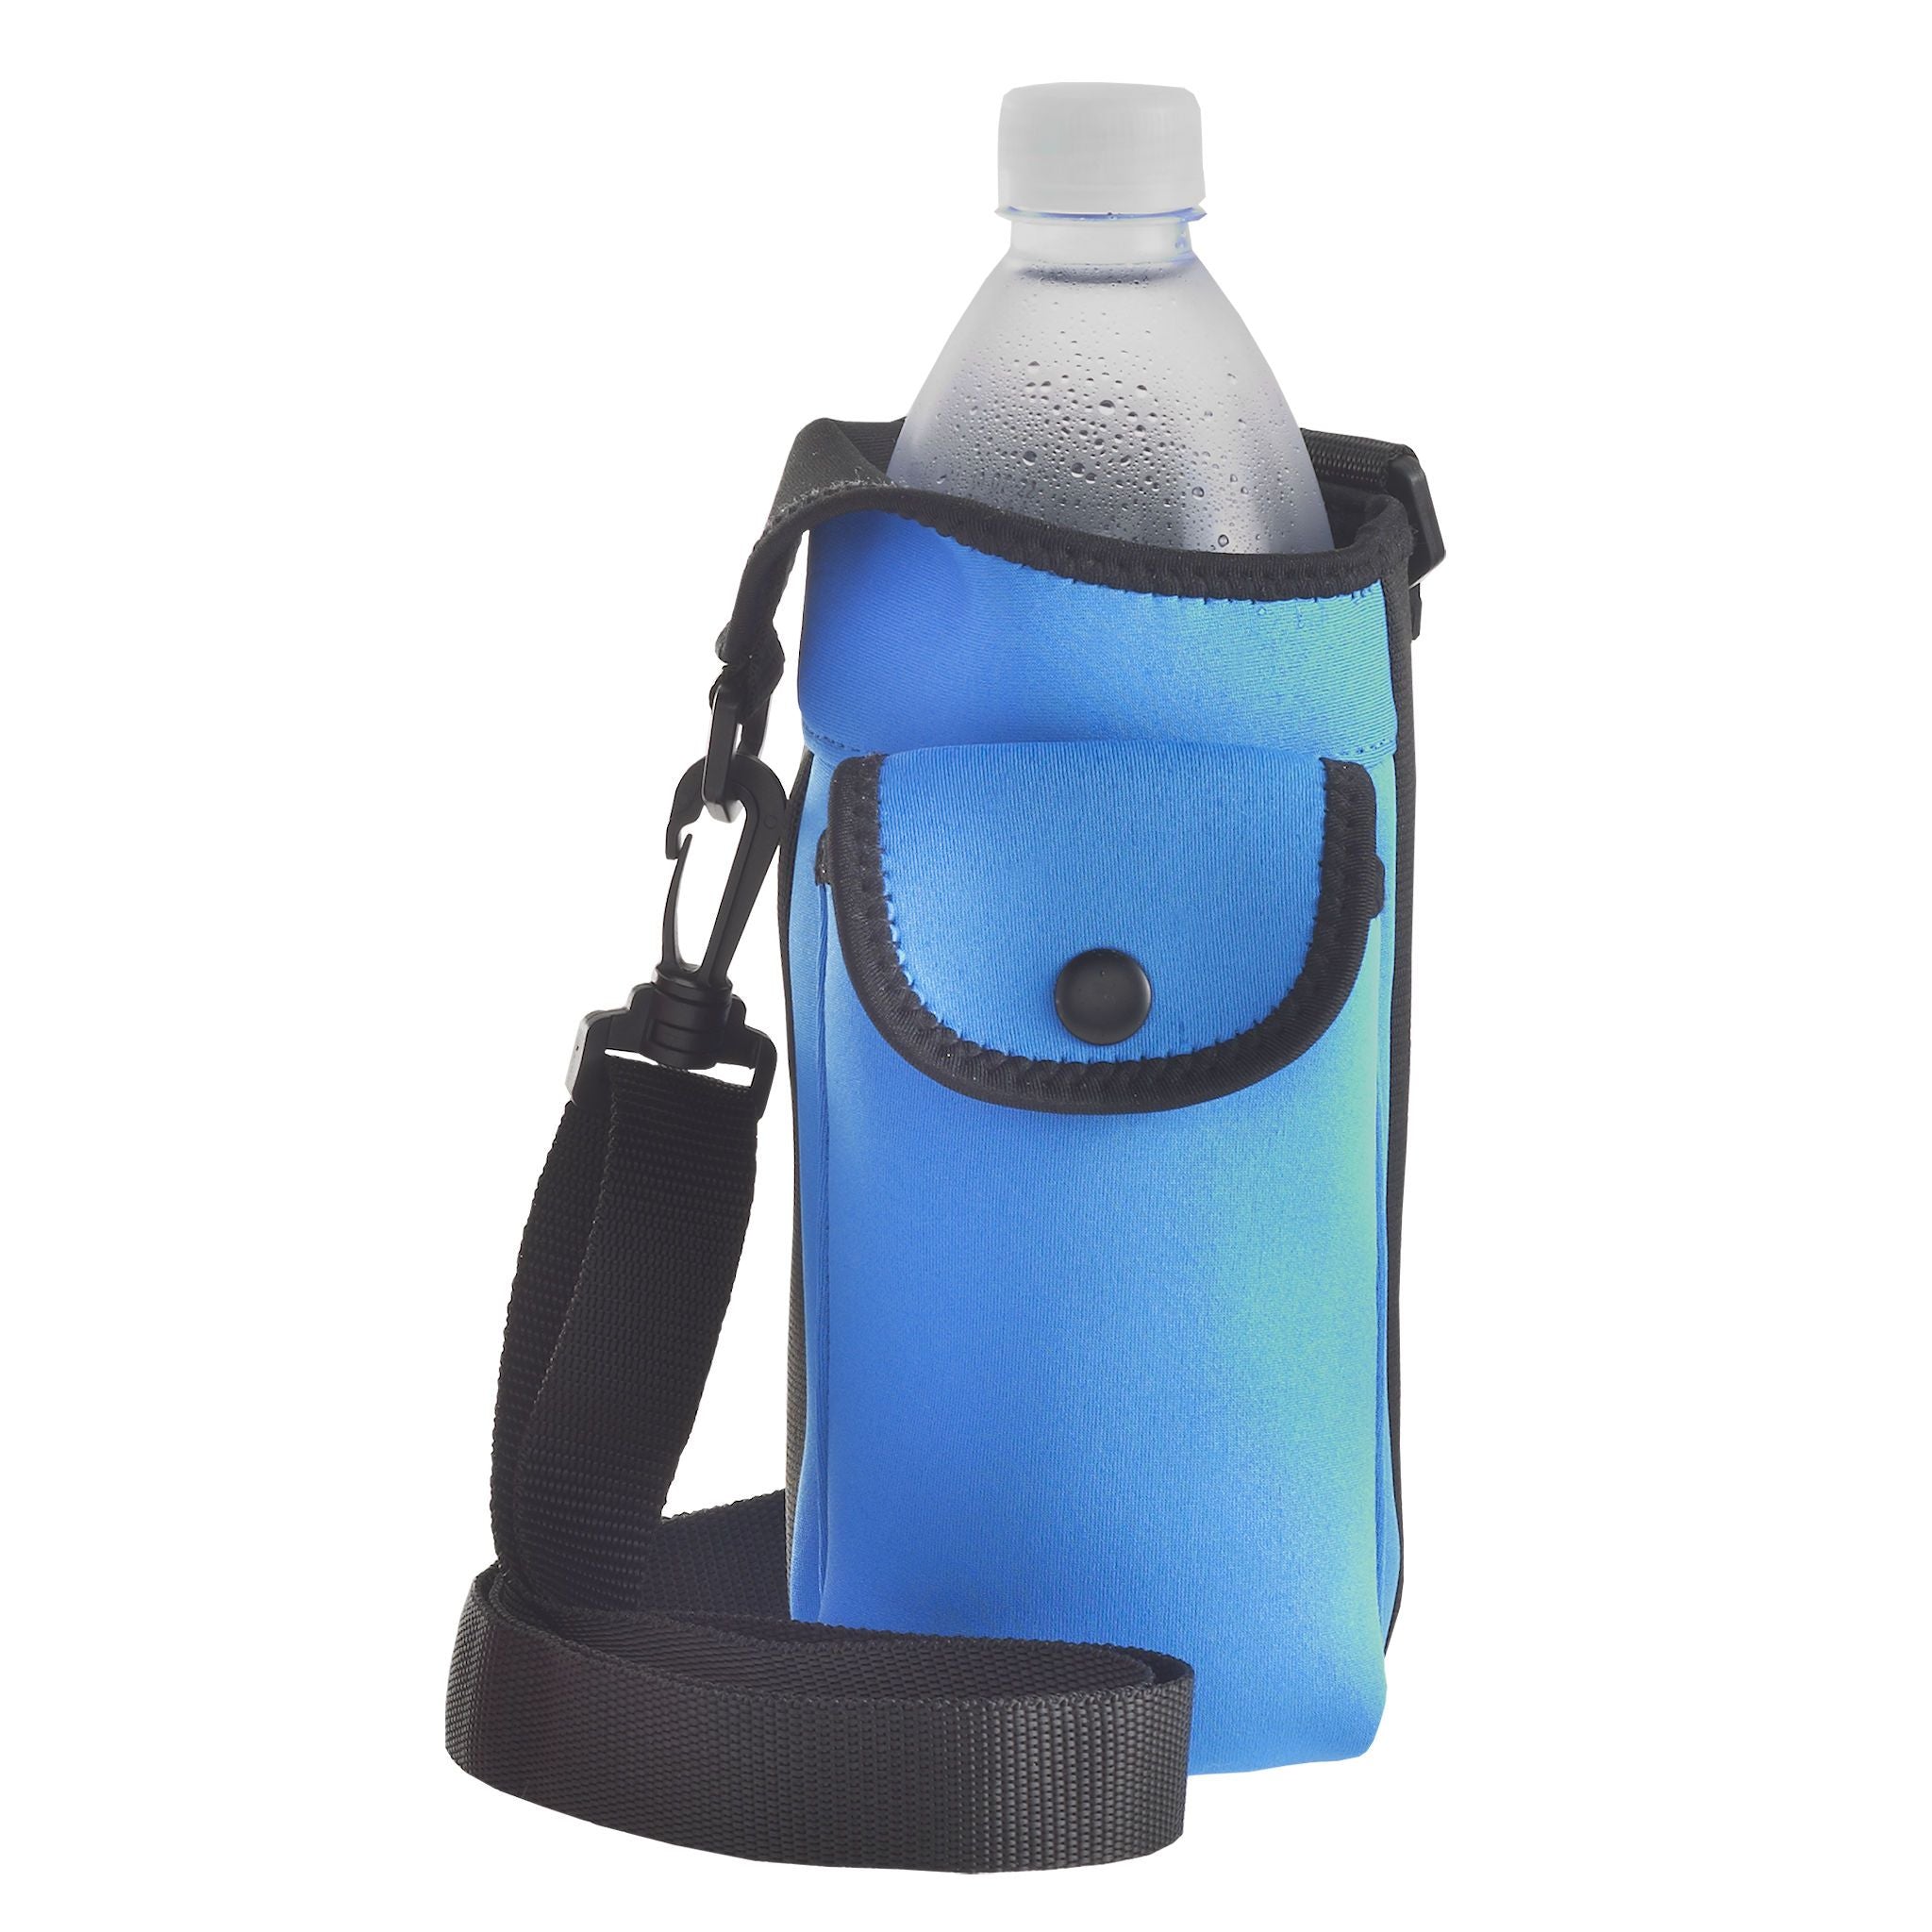 AAA.com  AquaPockets Water Bottle Carrier by Smooth Trip